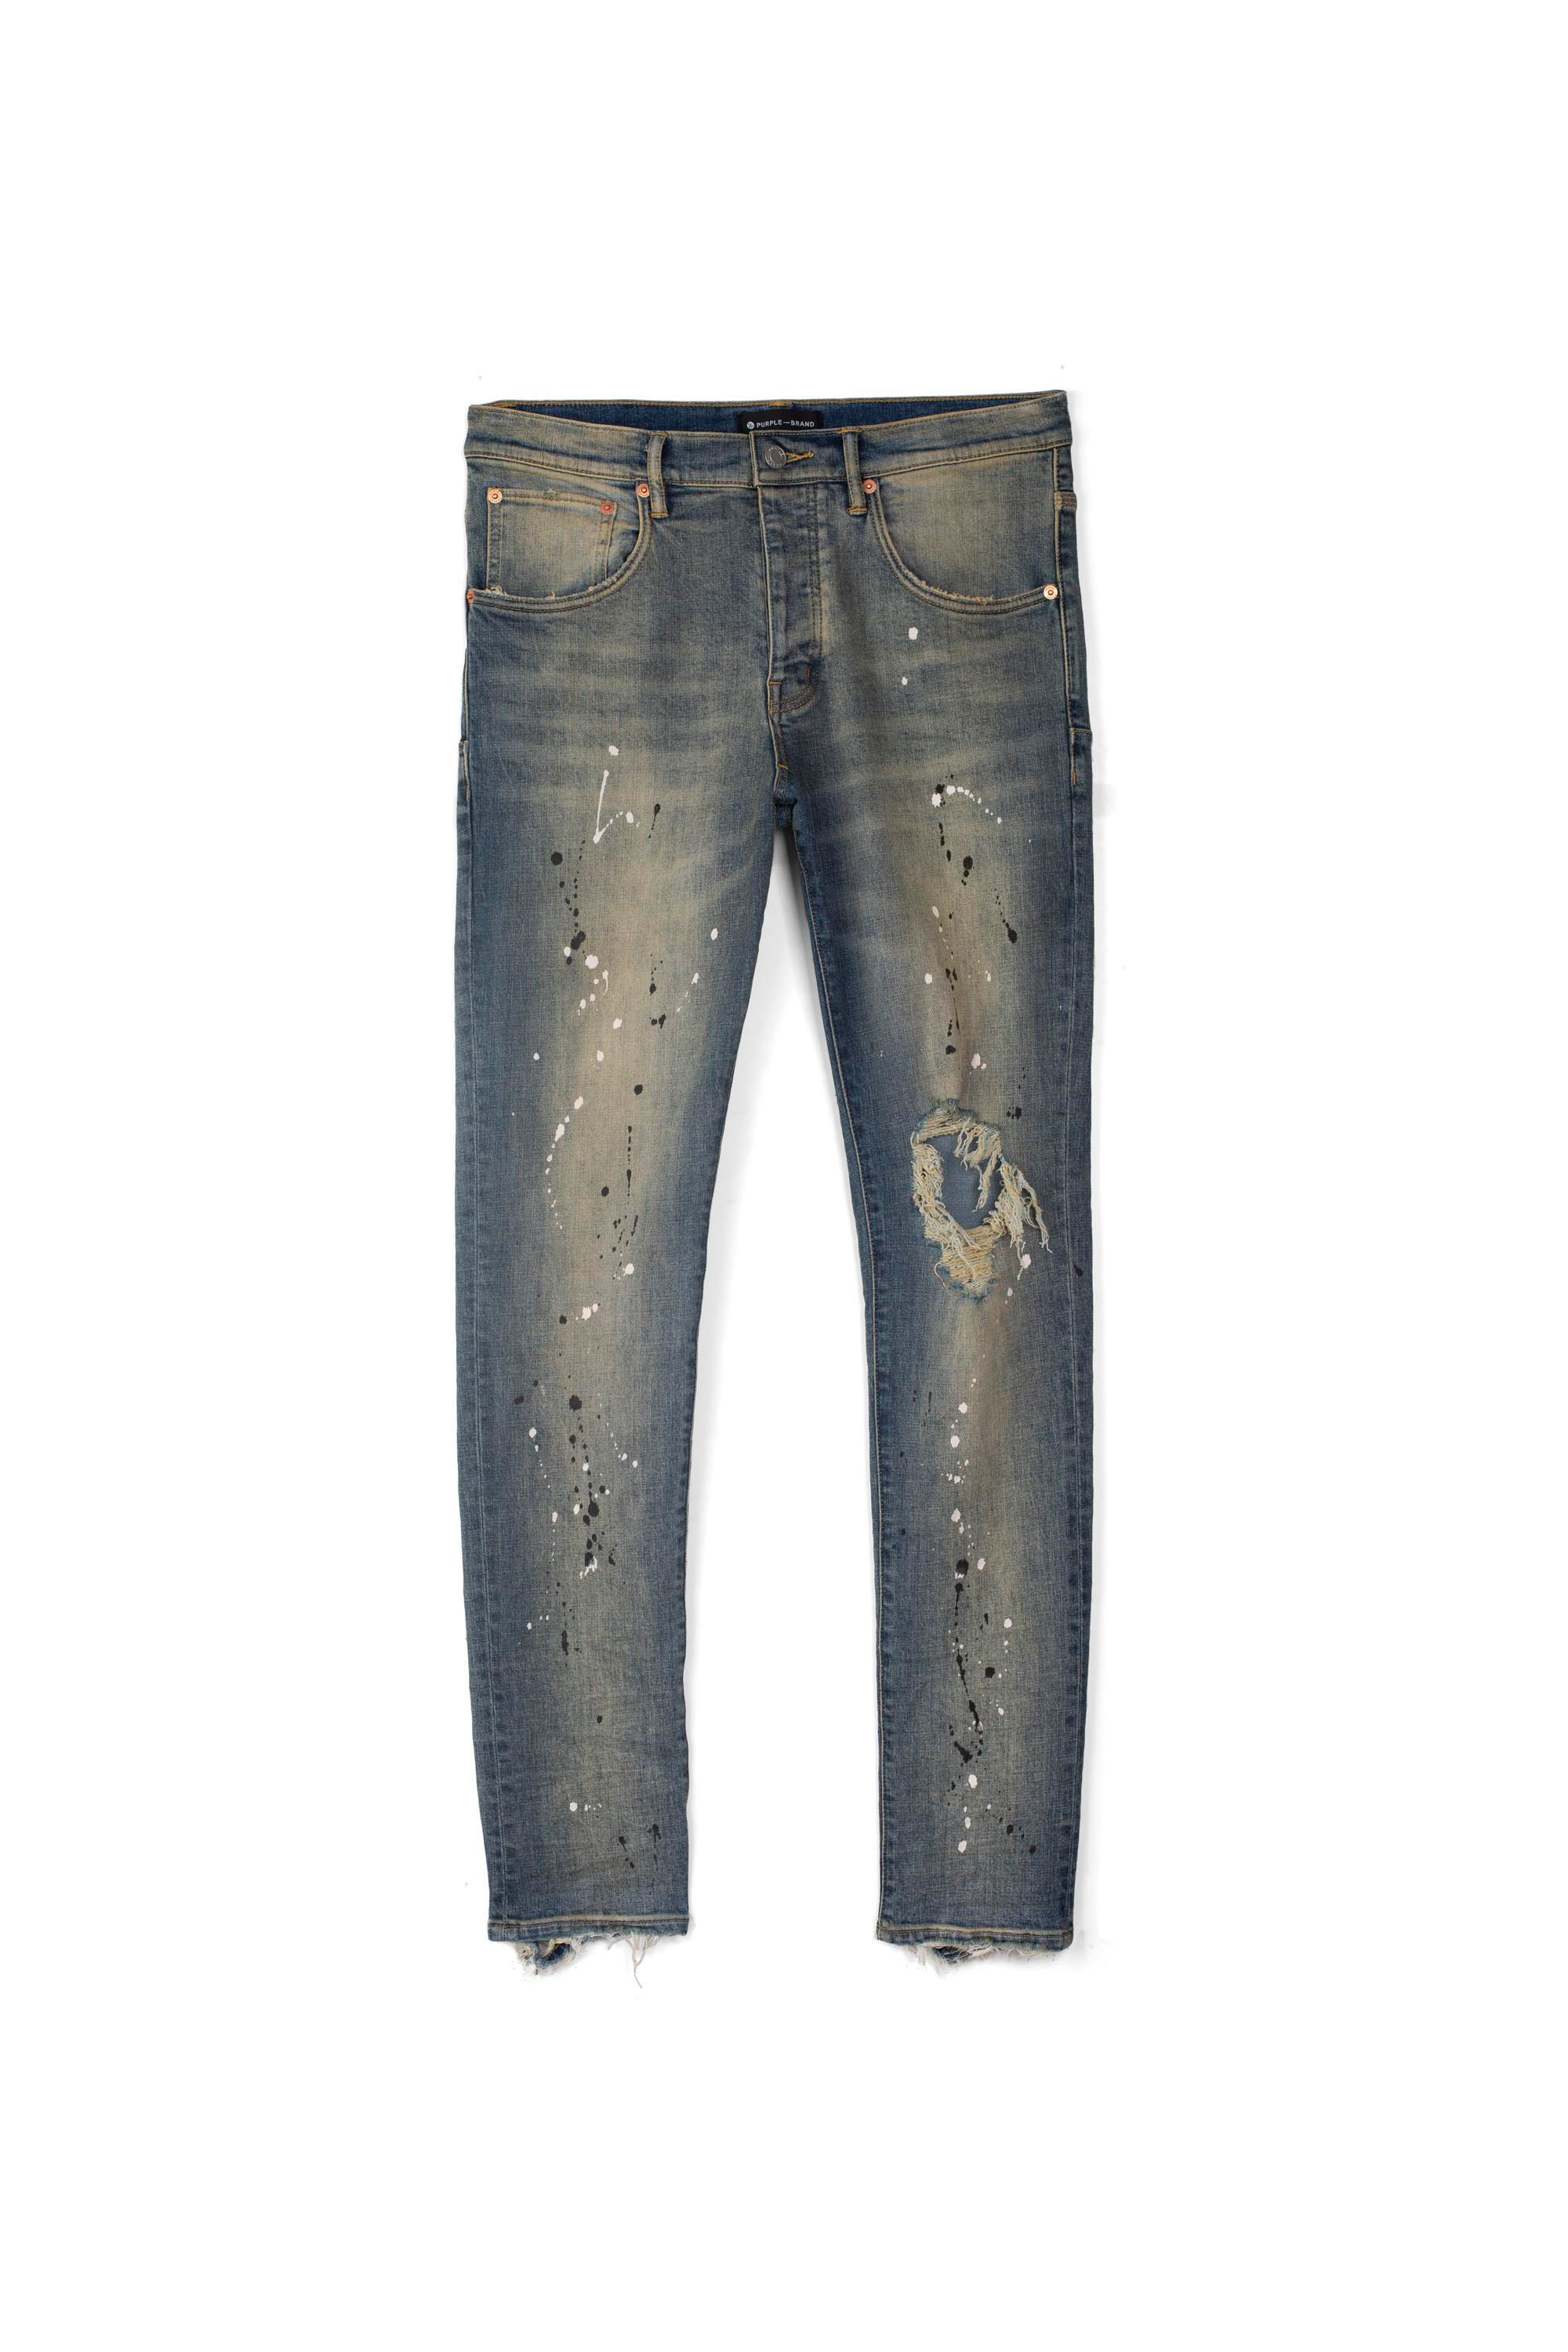 Purple Brand Mid Rise Tapered Jeans - Blue Over Spray Repair